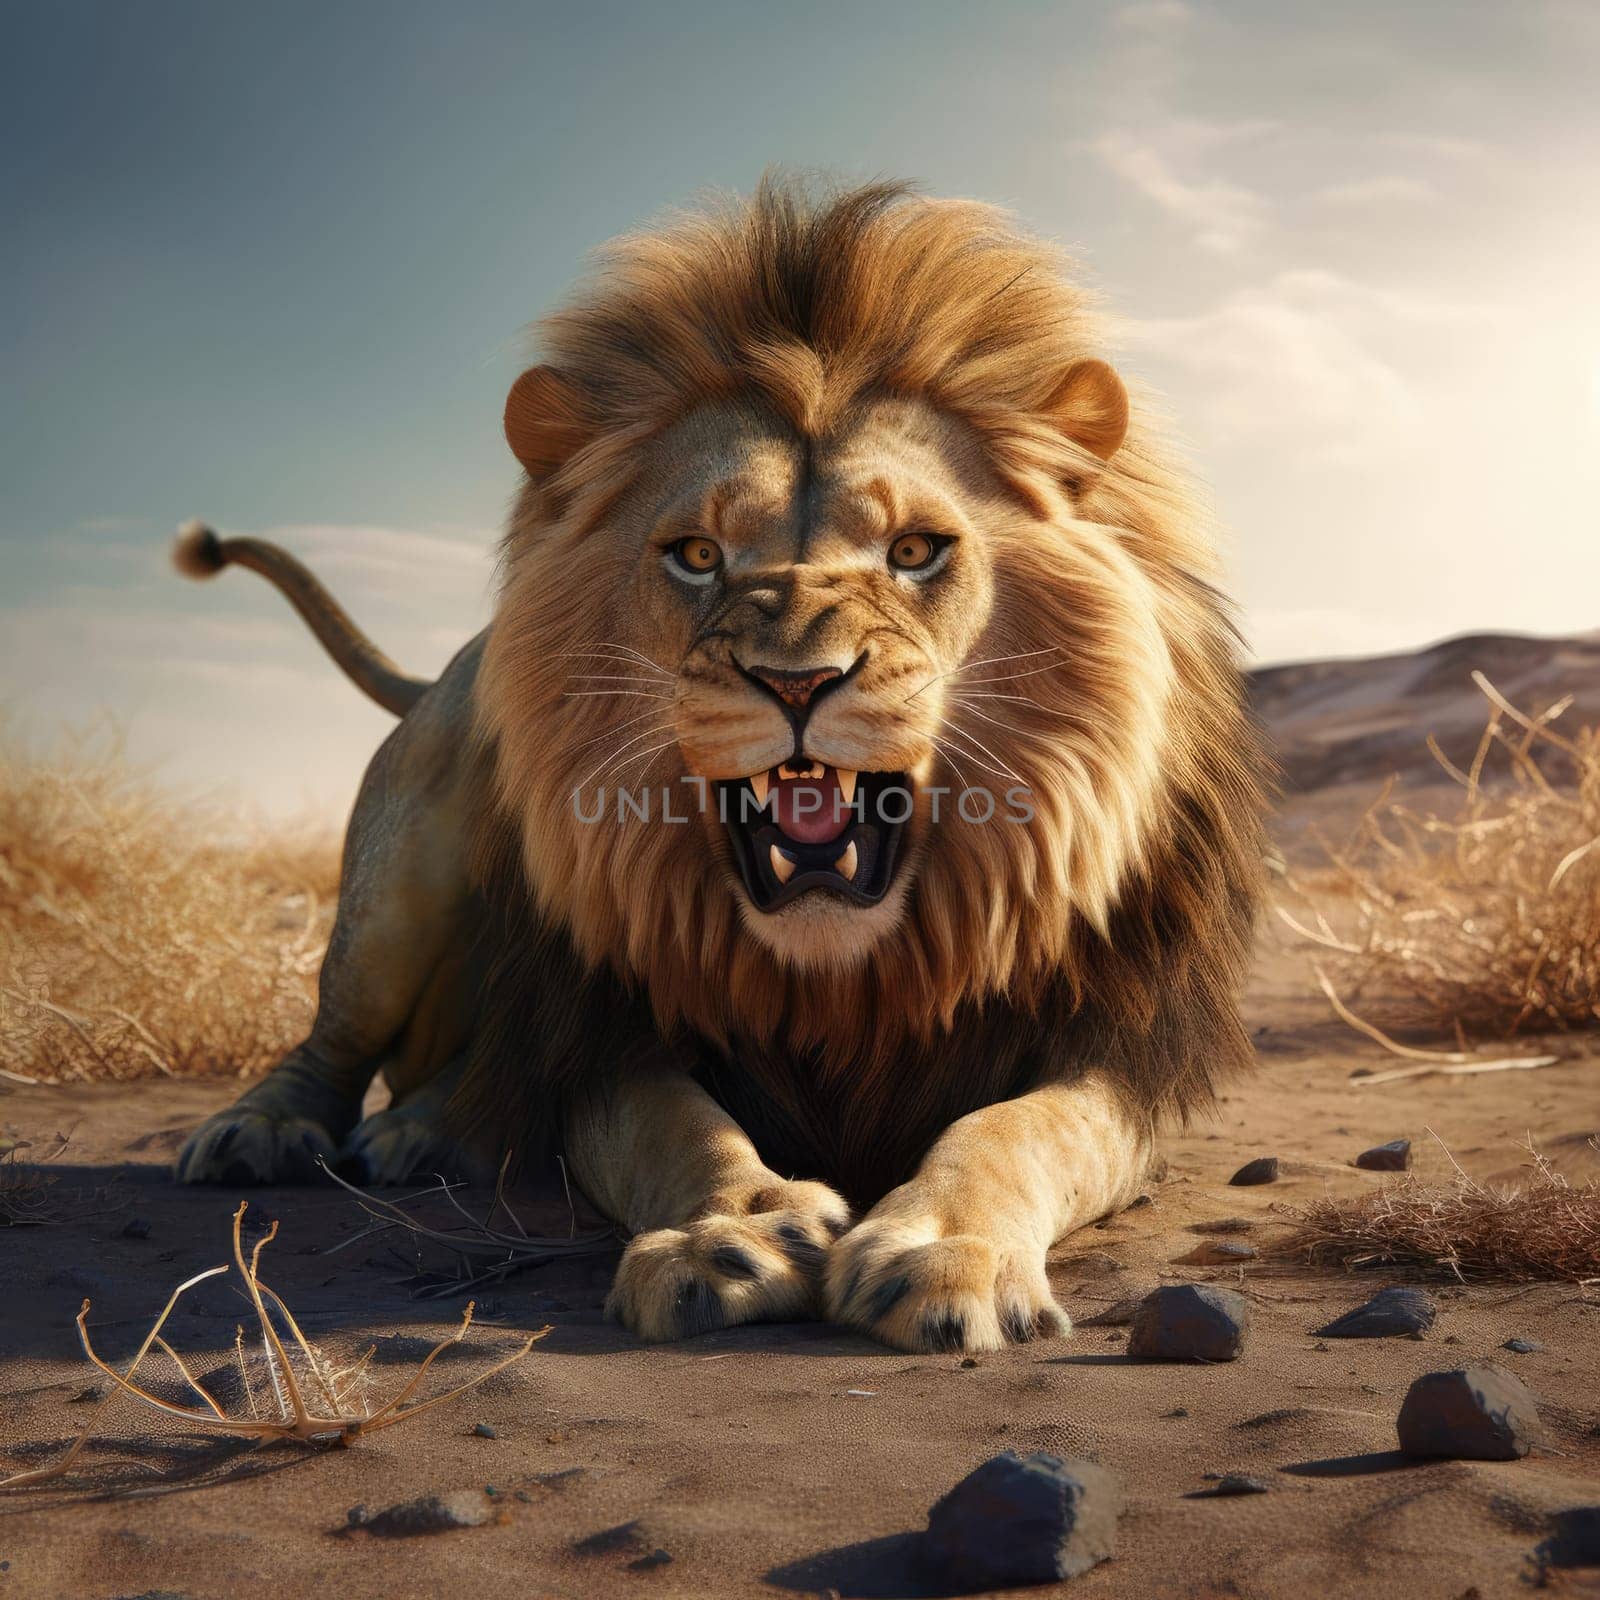 The Great Formidable Lion by cherezoff